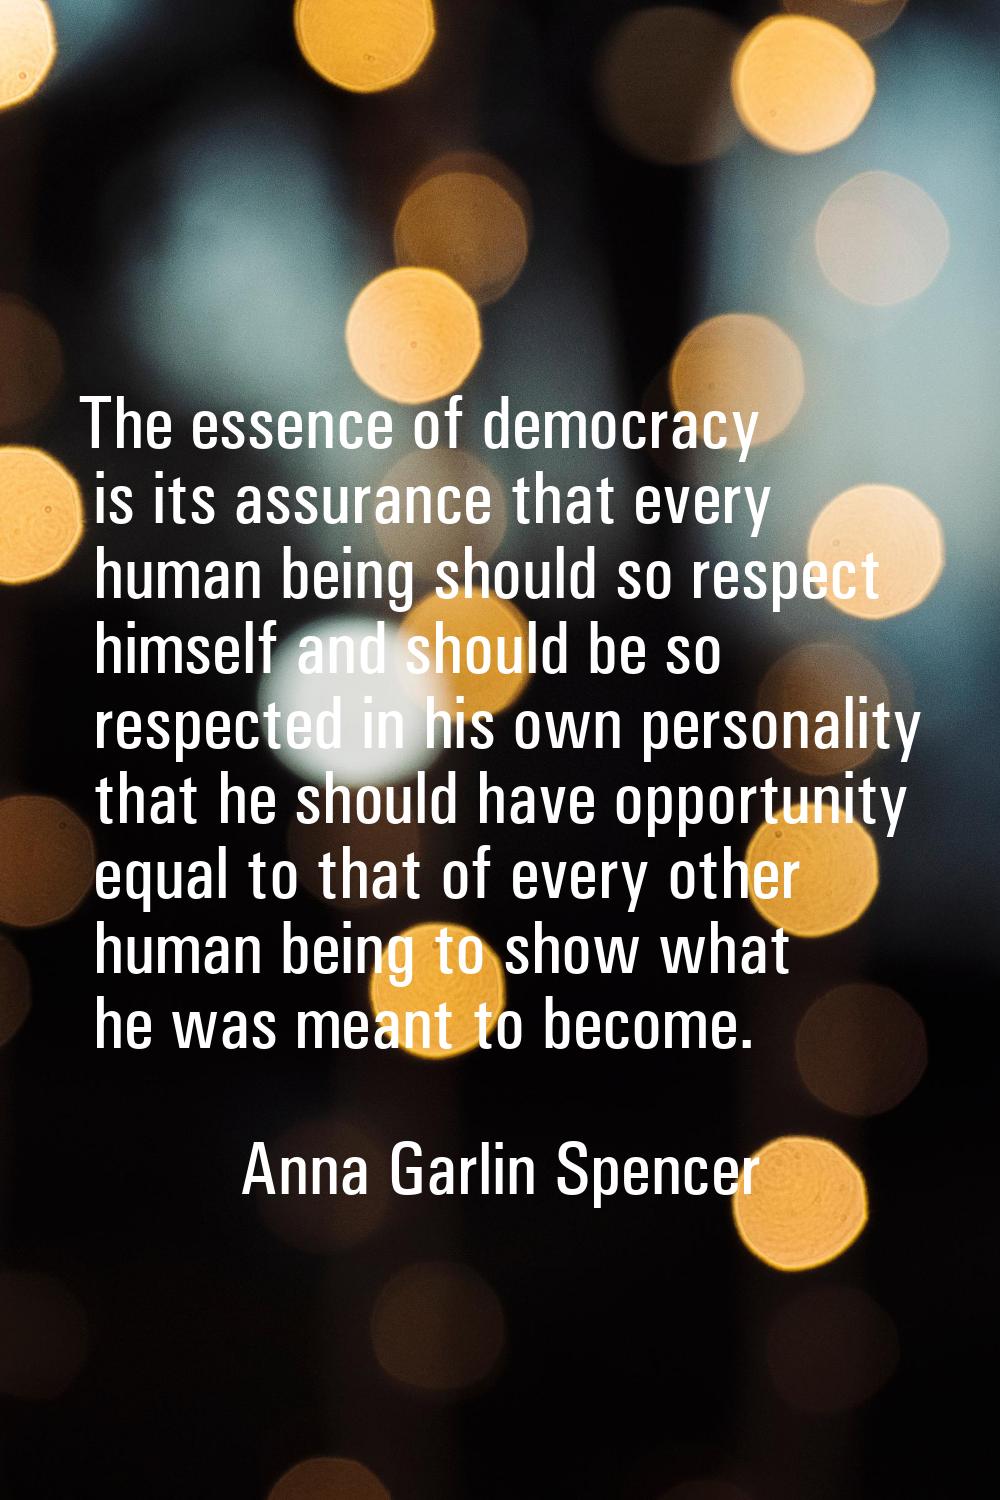 The essence of democracy is its assurance that every human being should so respect himself and shou